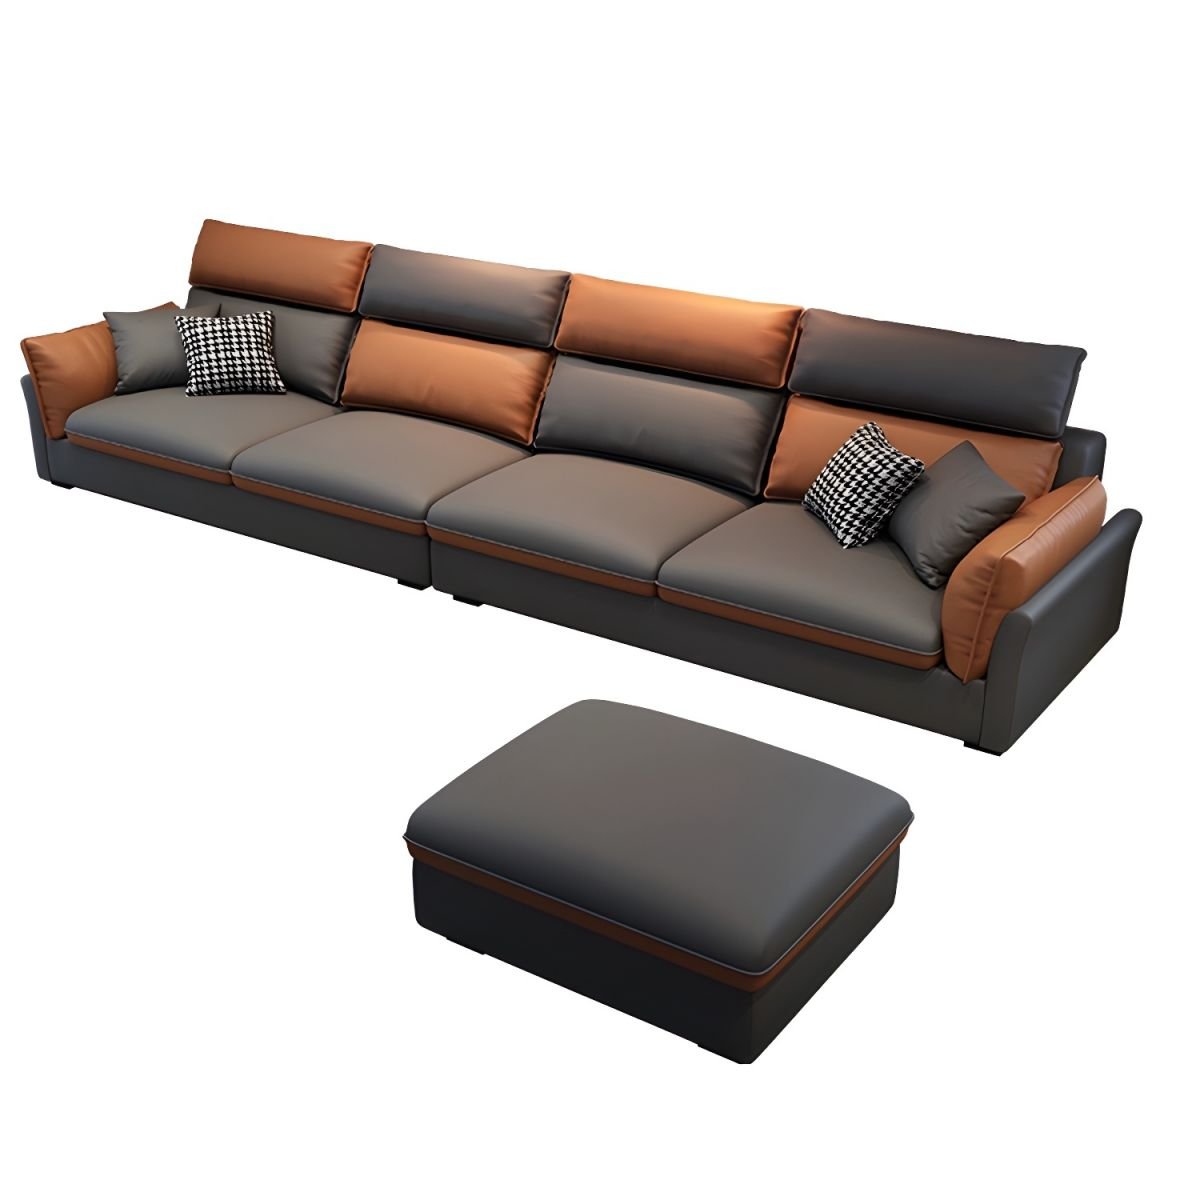 Contemporary Pillow Top Arm Sectional Sofa in Gray and Orange with Adjustable Back - 126"L x 35"W x 31"H+35"L x 24"W x 16"H Tech Cloth